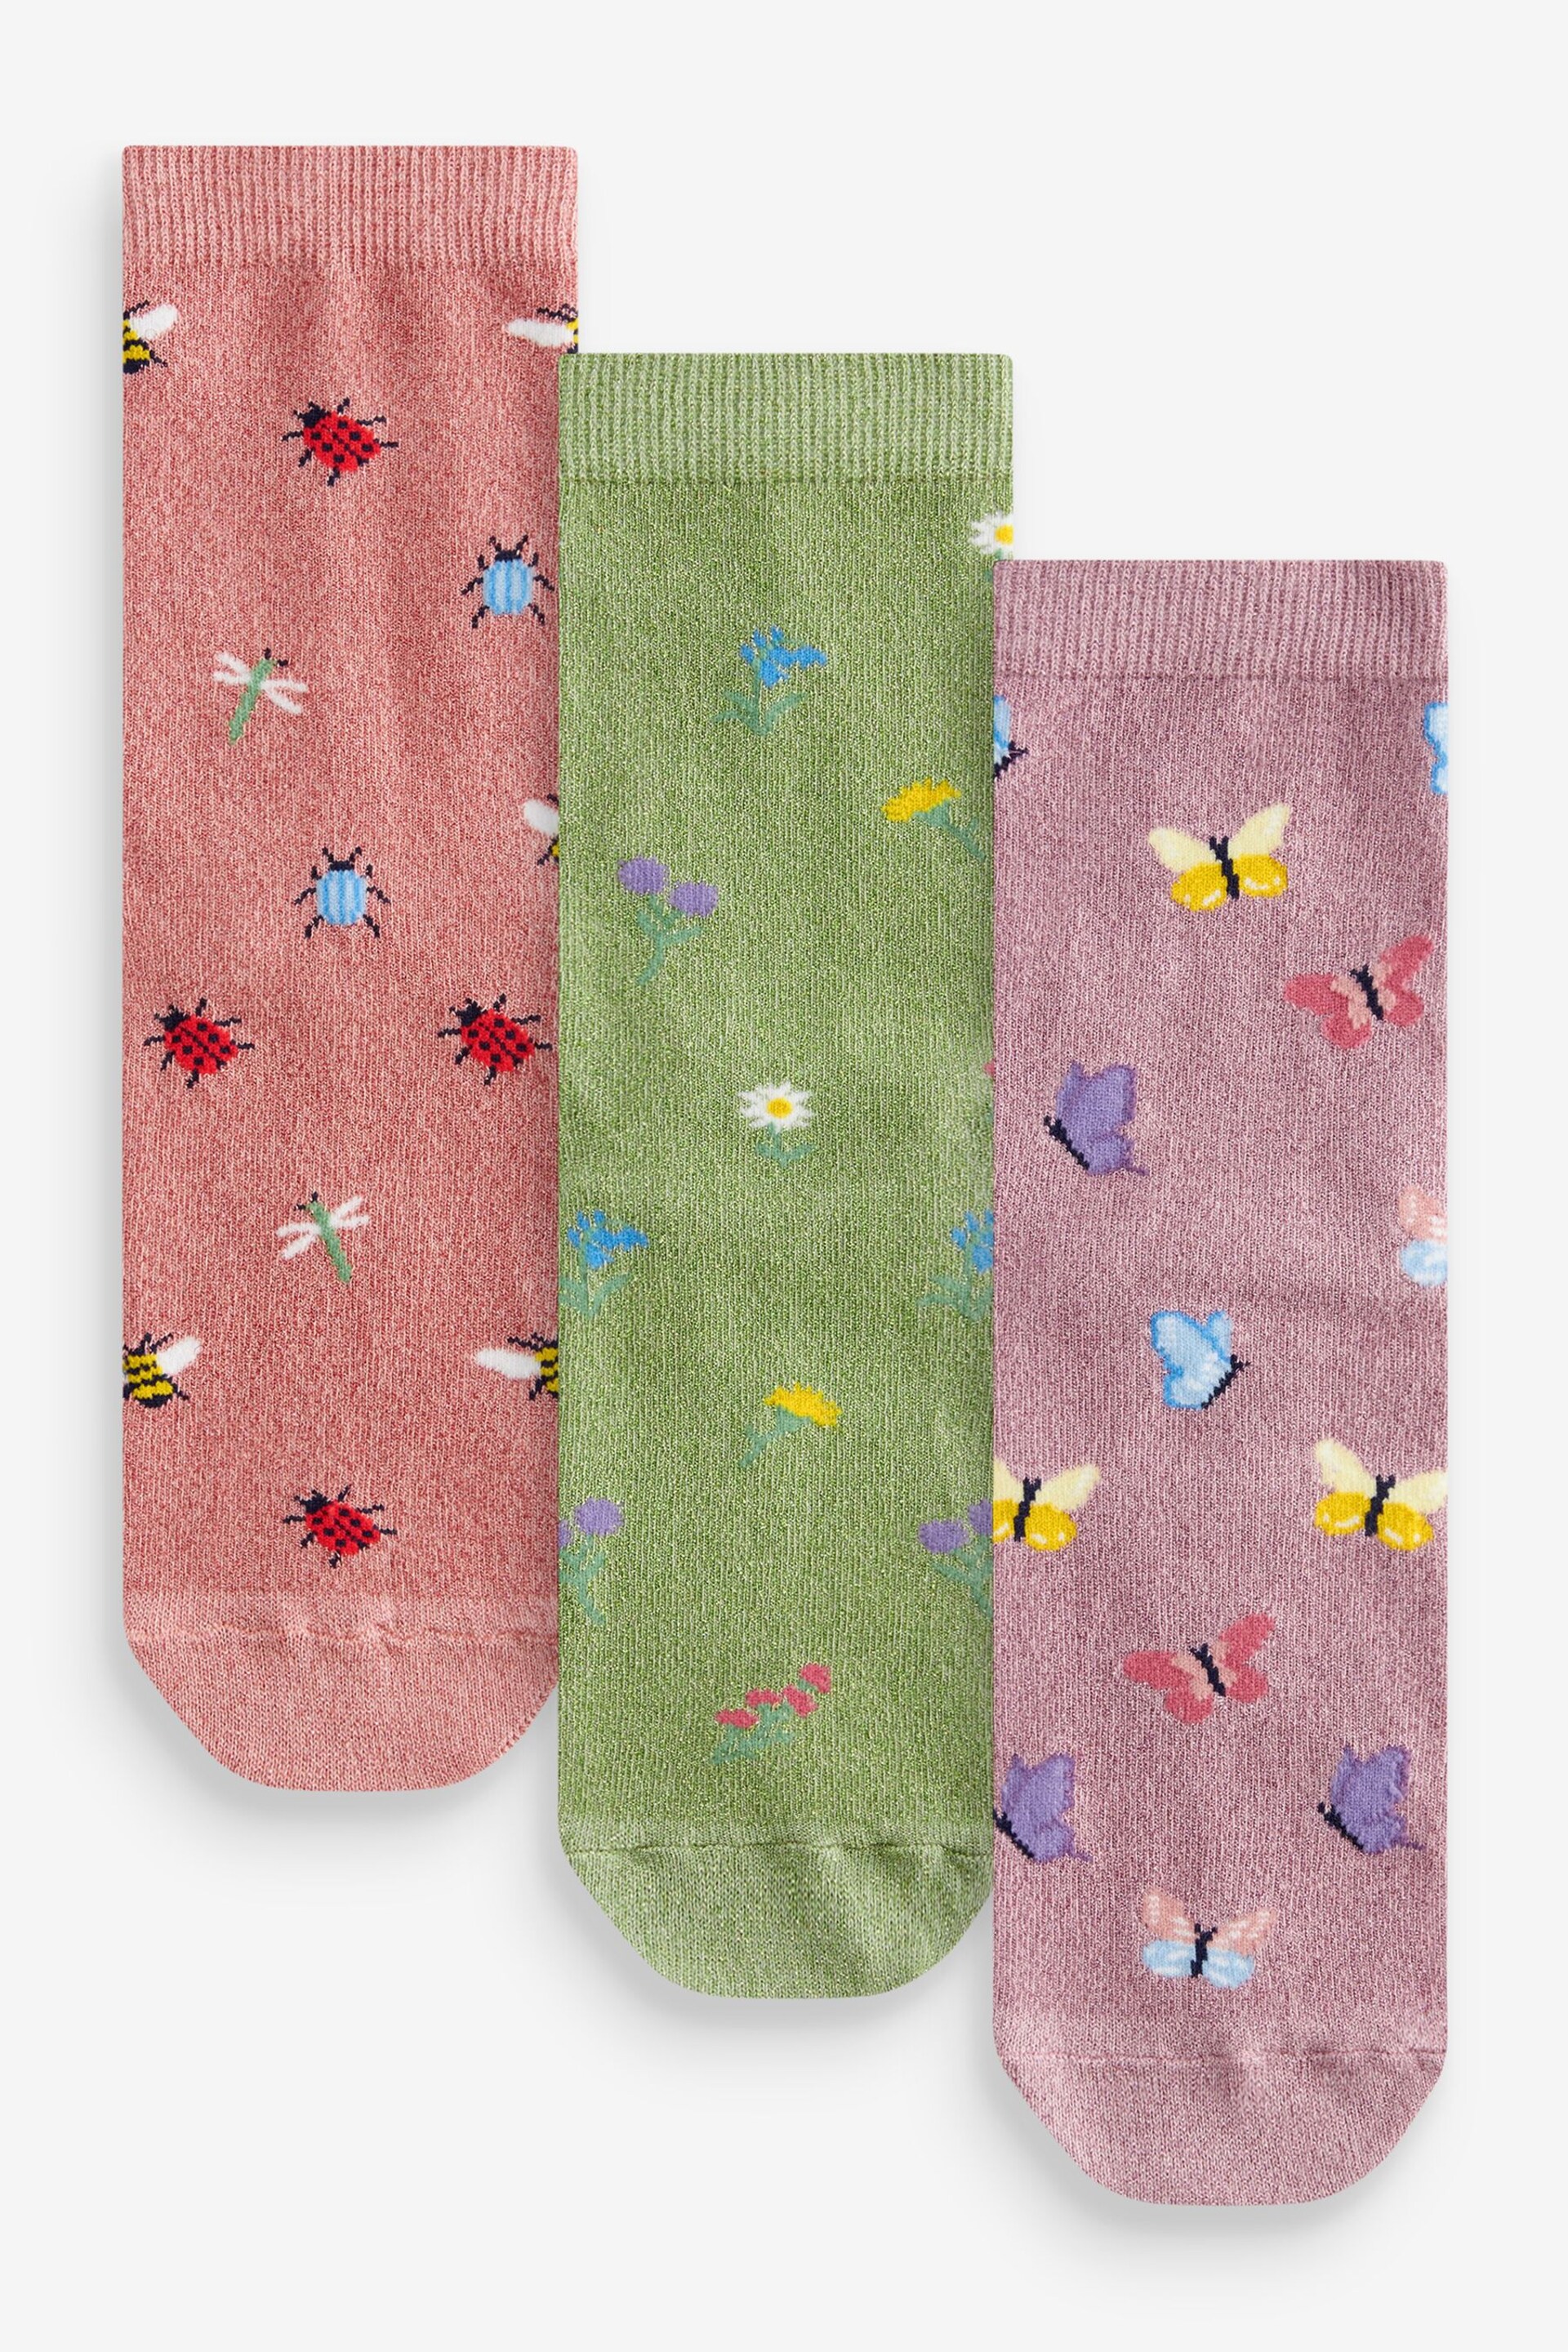 Flowers/Bees/Butterflies Sparkle Ankle Socks 3 Pack - Image 1 of 4